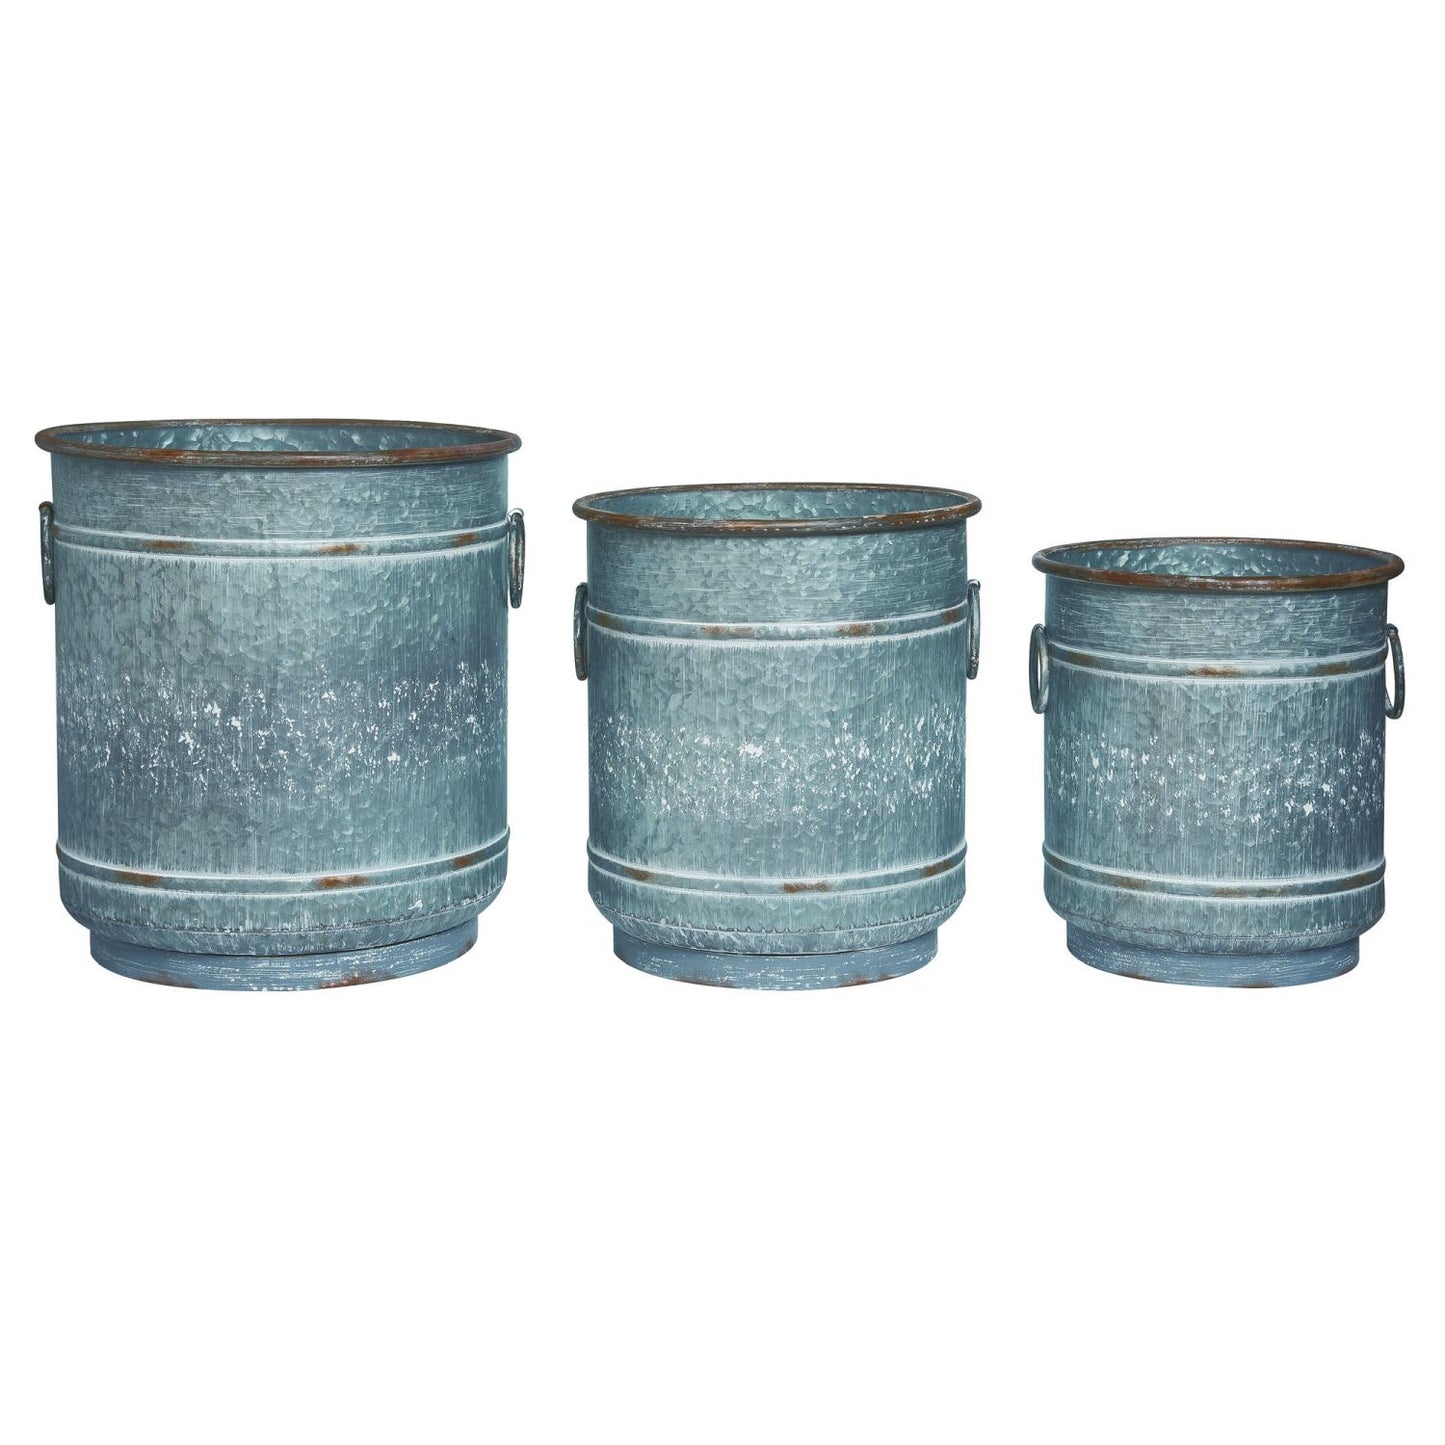 Transpac Metal Barrel Planters With Drainage Hole, Set Of 3